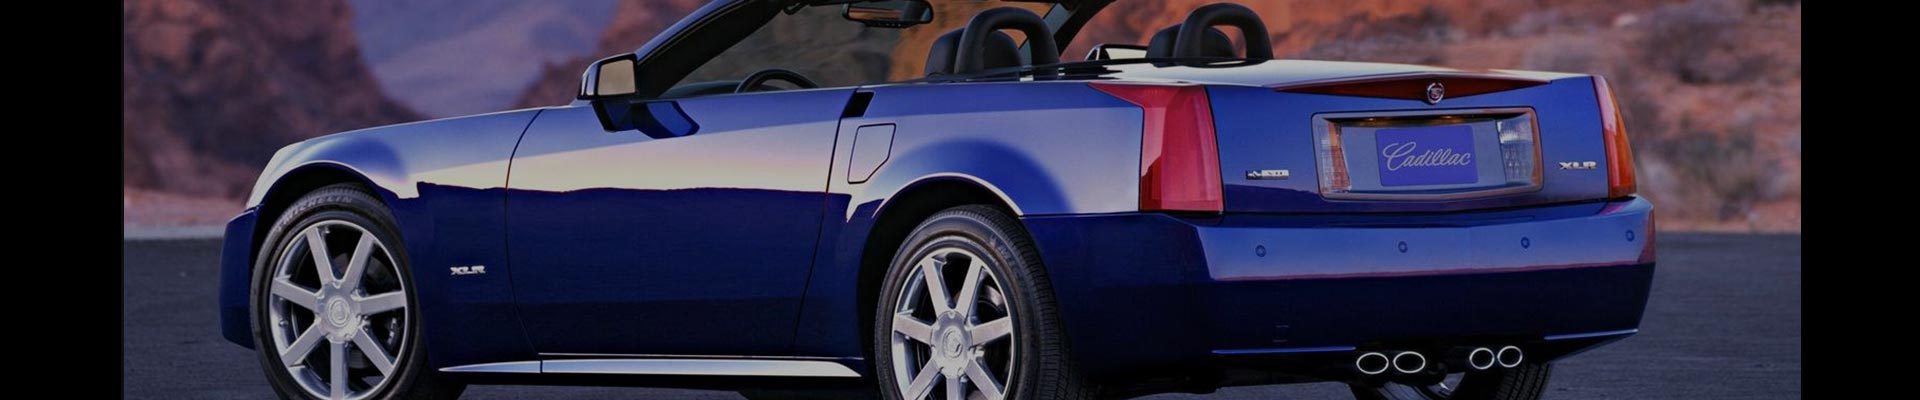 Shop Replacement and OEM 2006 Cadillac XLR Parts with Discounted Price on the Net